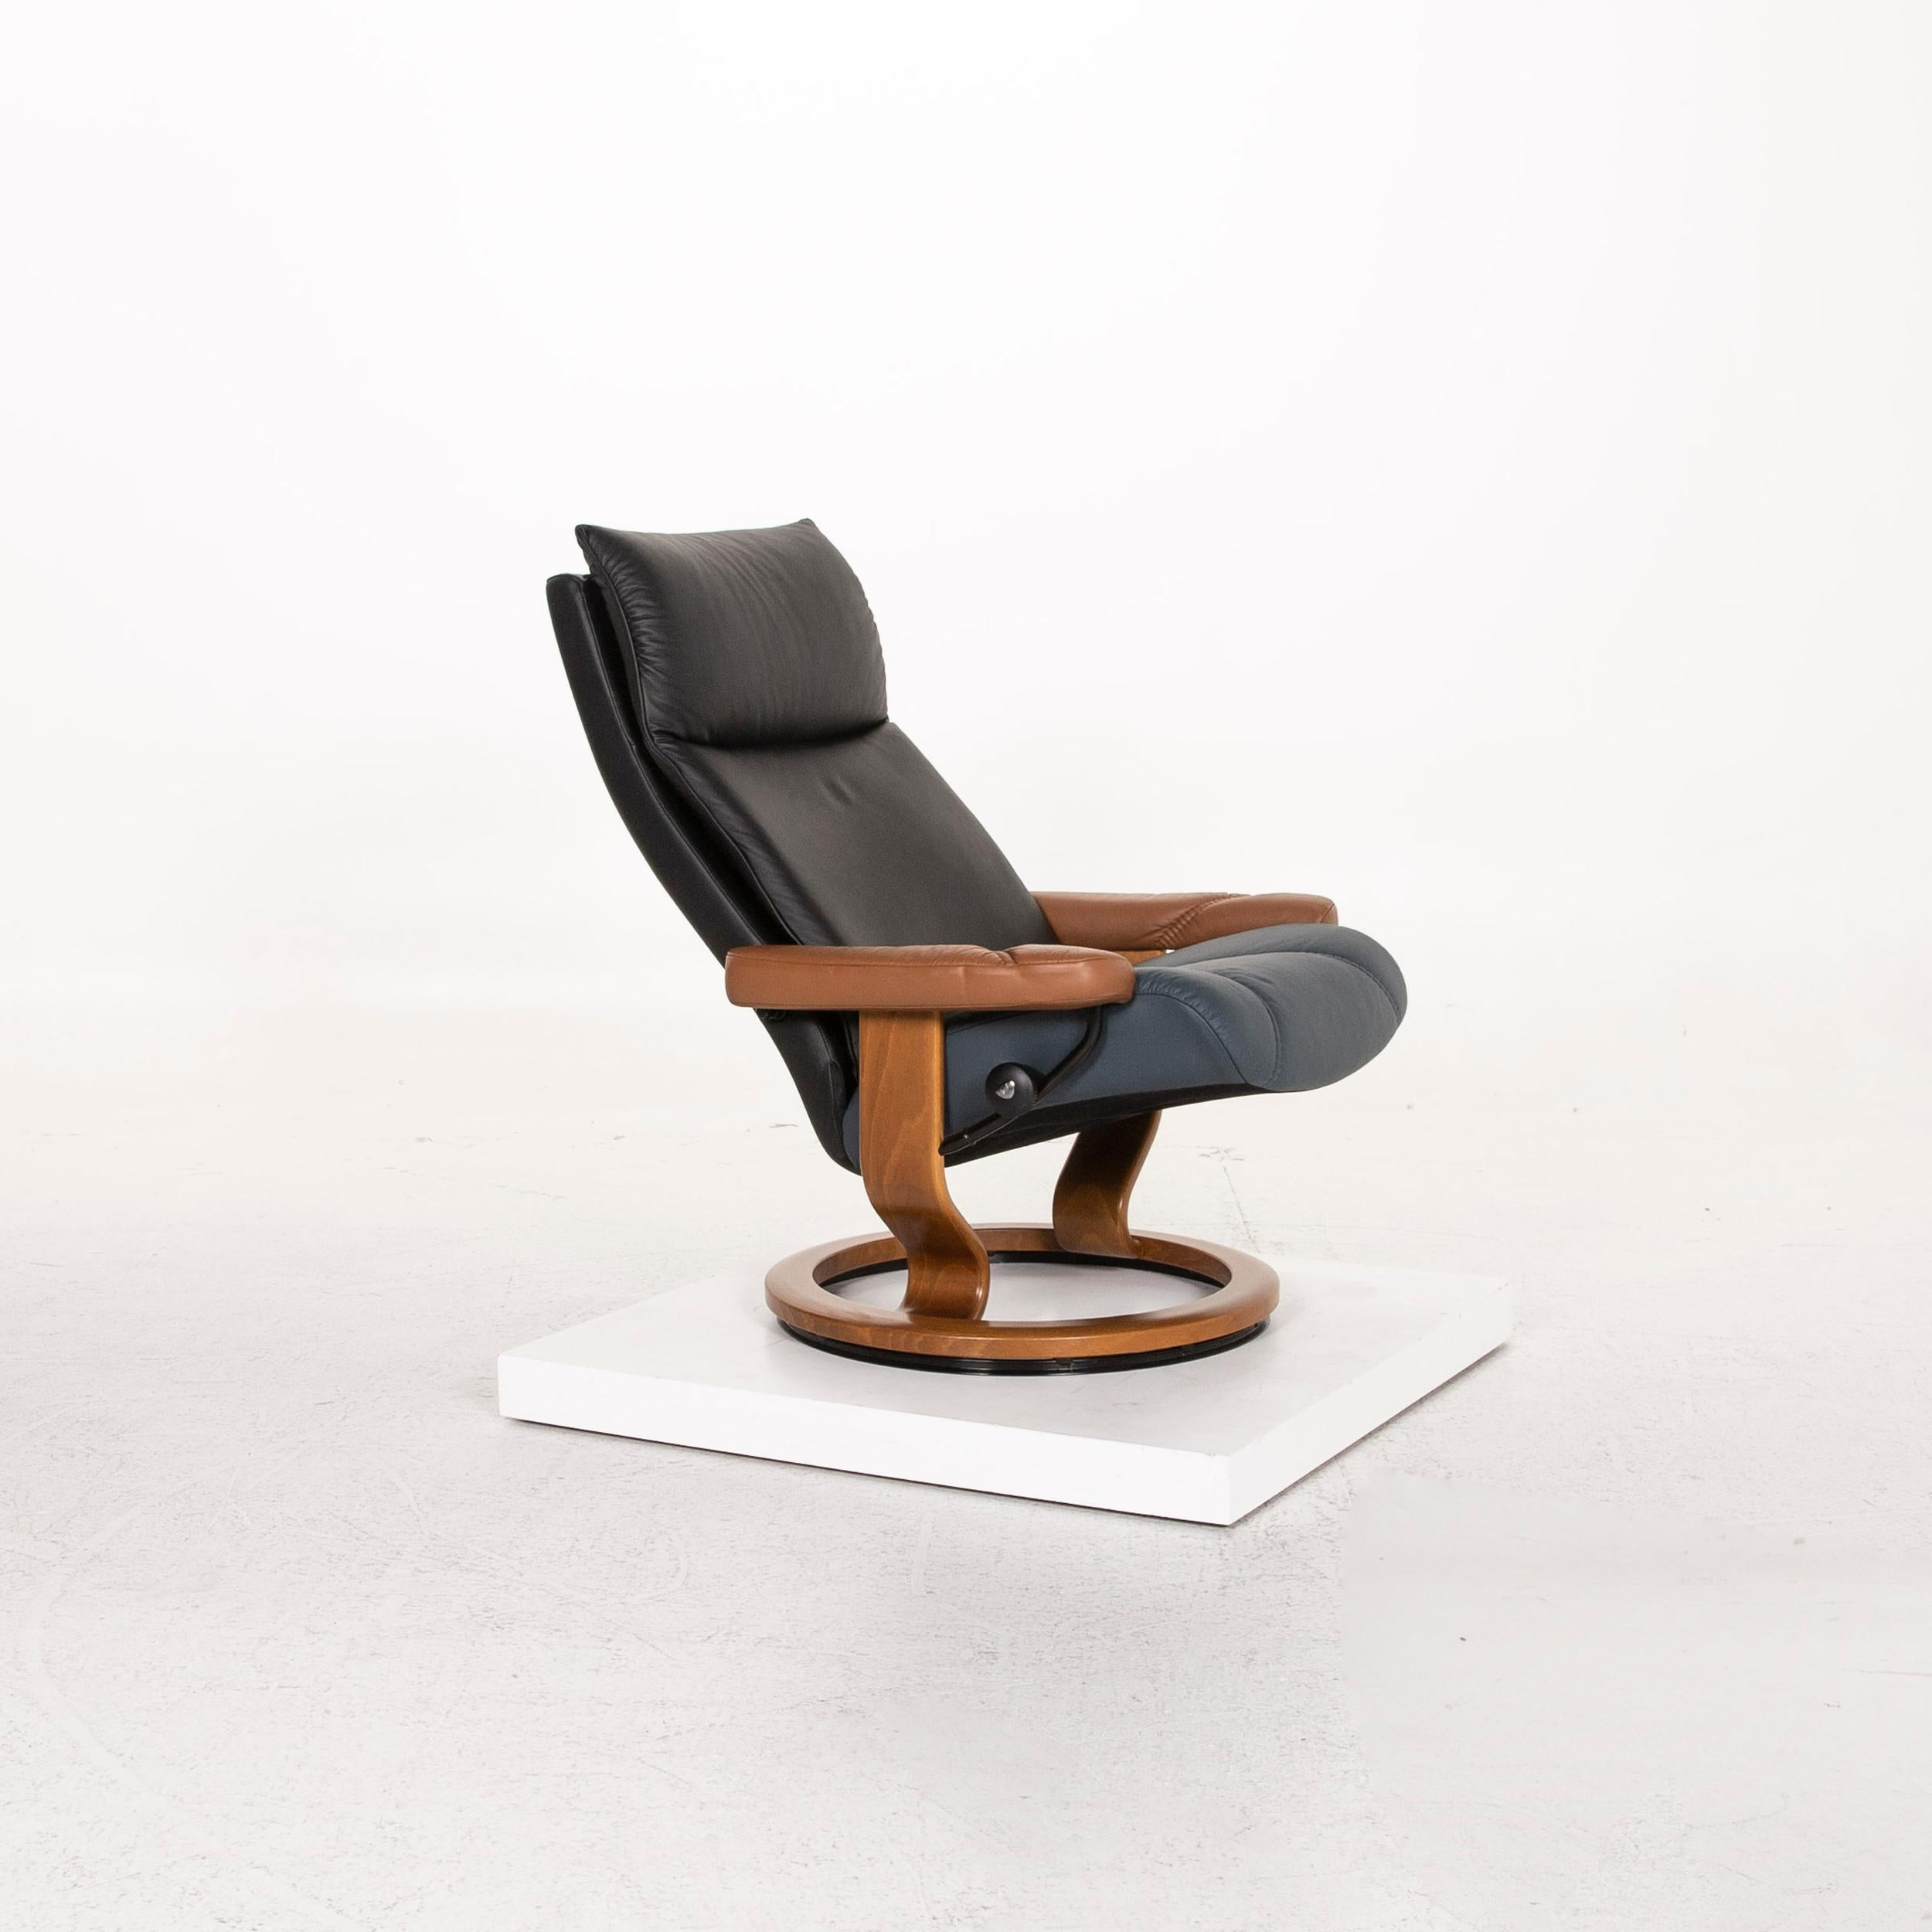 We bring to you a Stressless Consul leather armchair brown blue black function relax function.
    
 

 Product measurements in centimeters:
 

Depth 78
Width 84
Height 103
Seat-height 45
Rest-height 52
Seat-depth 45
Seat-width